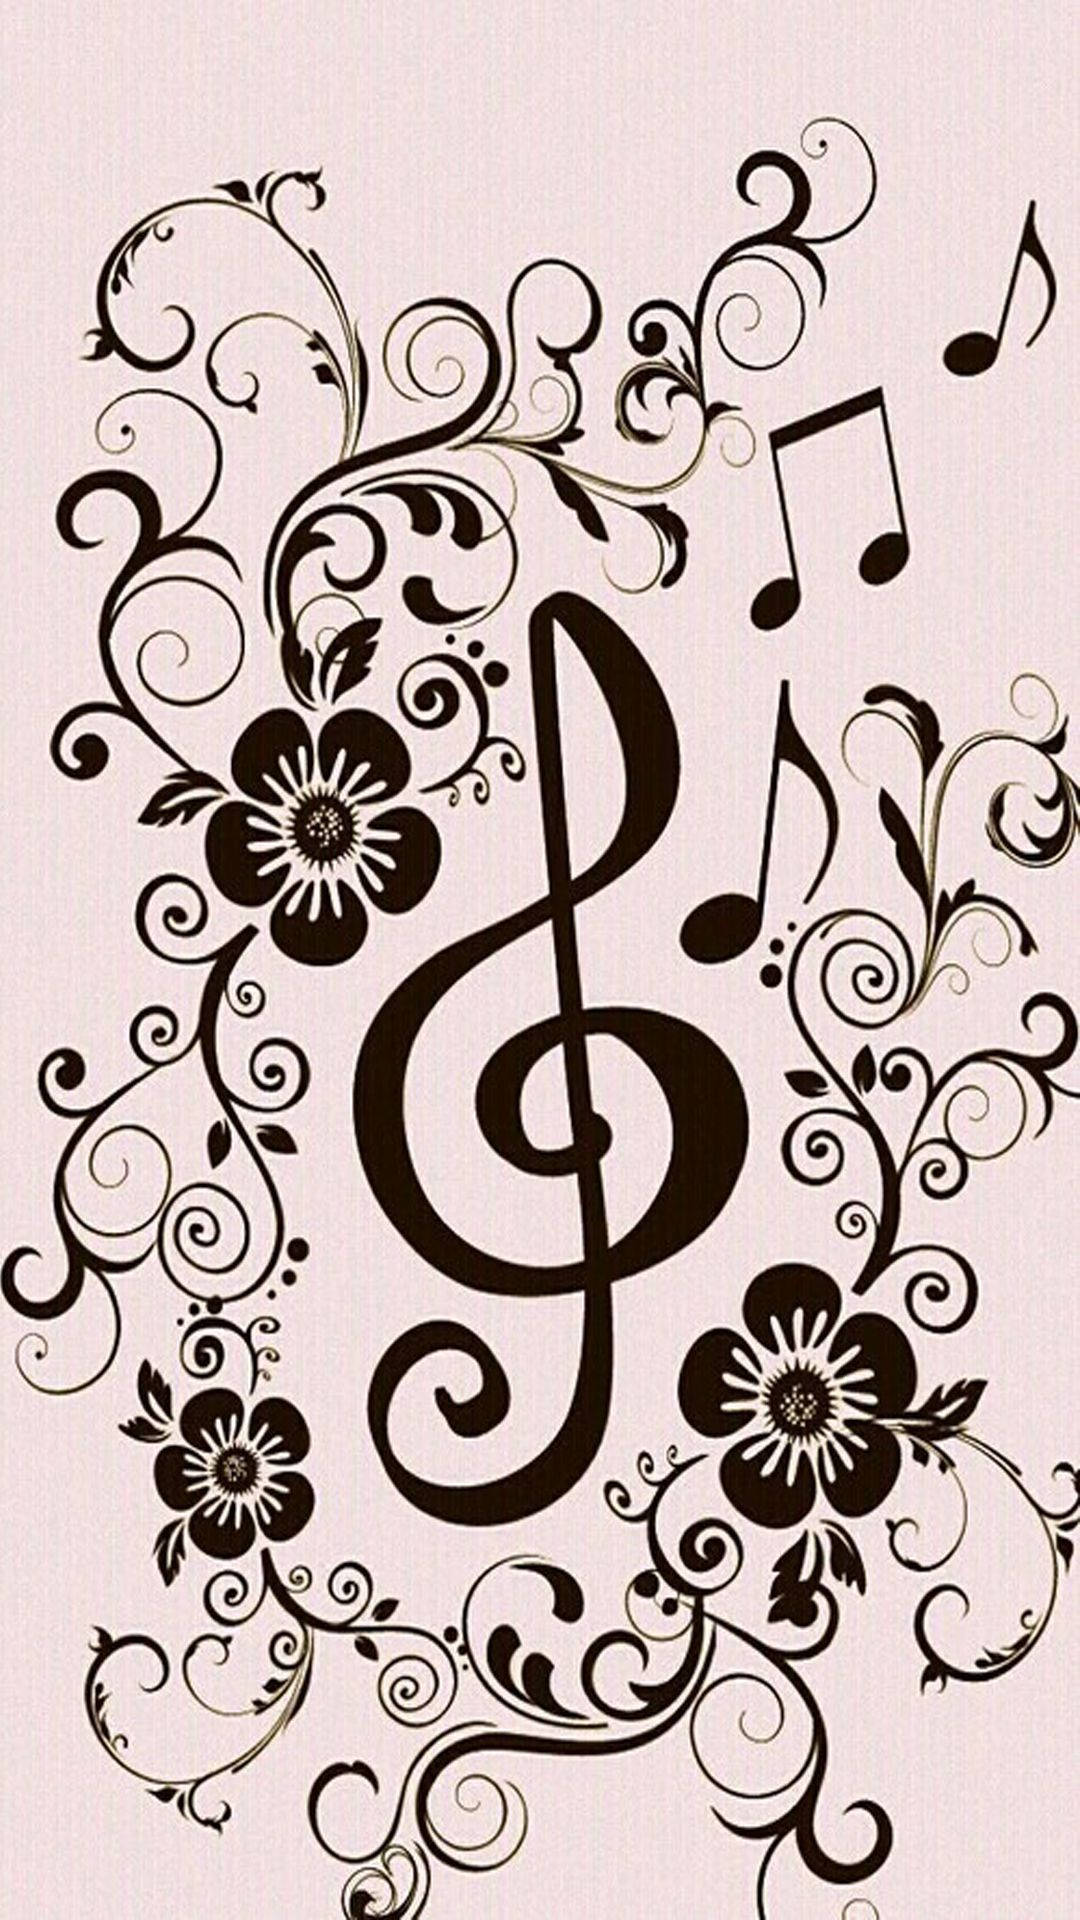 Cute Music Notes Floral Aesthetic Wallpaper